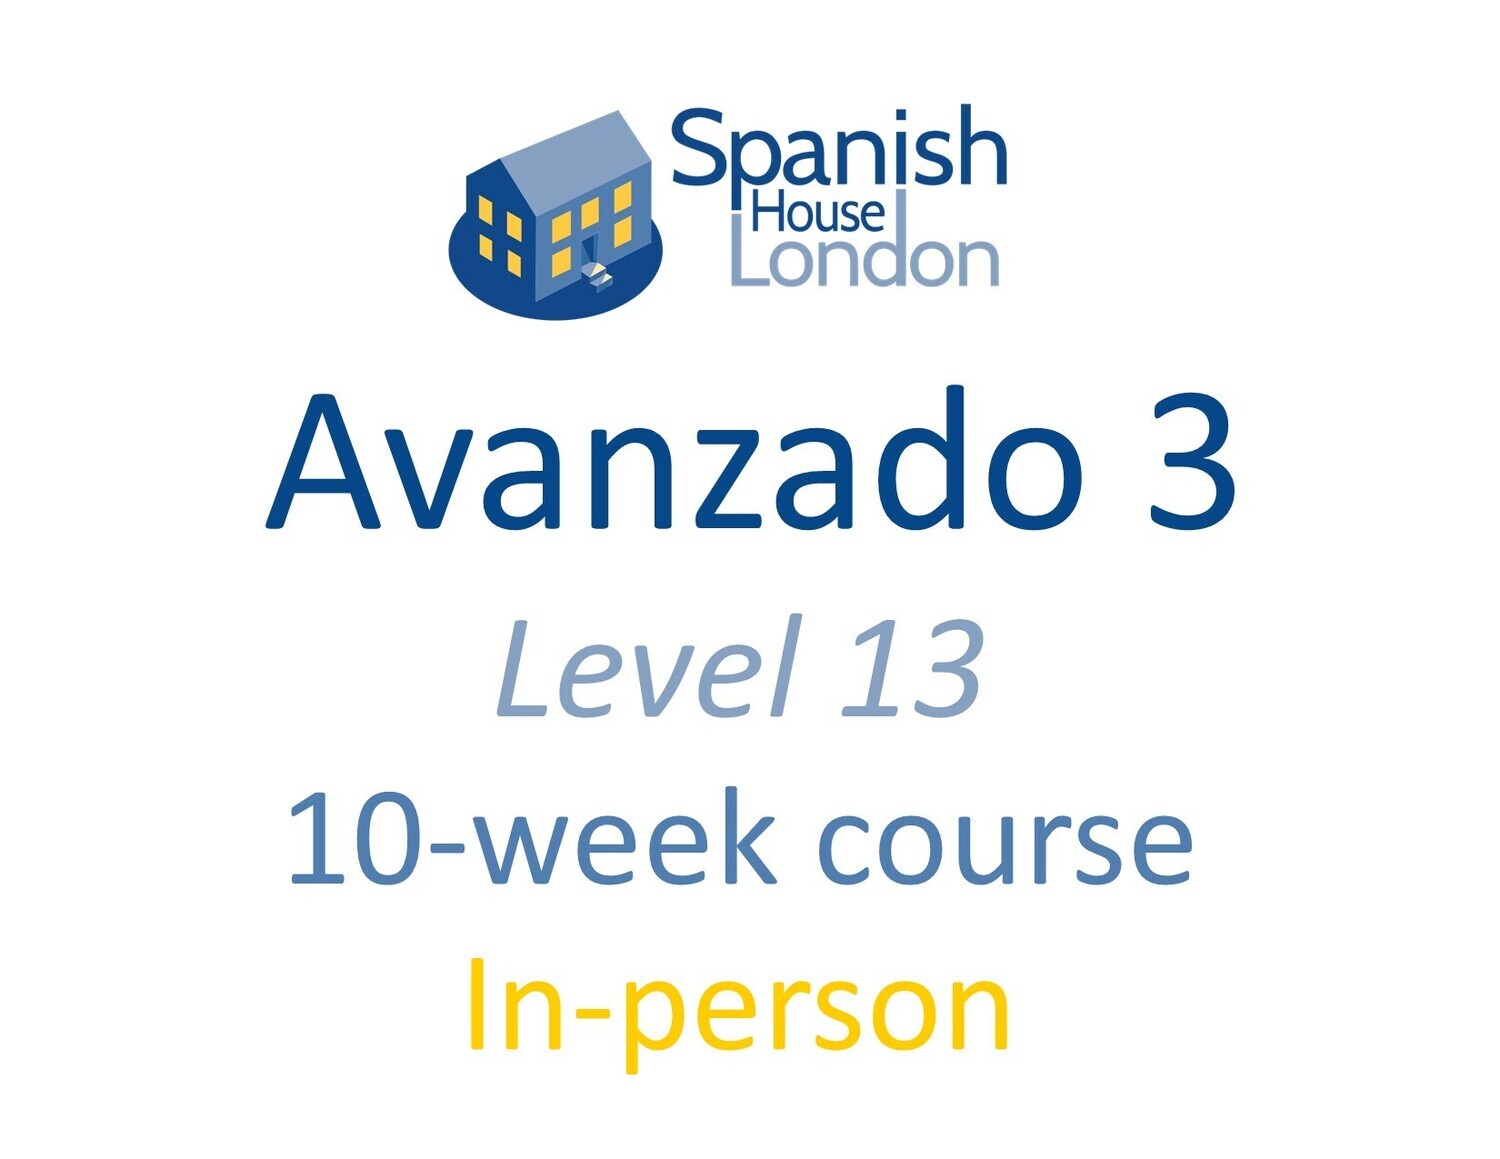 Avanzado 3 Course starting on 14th February at 7.30pm in Euston / King's Cross